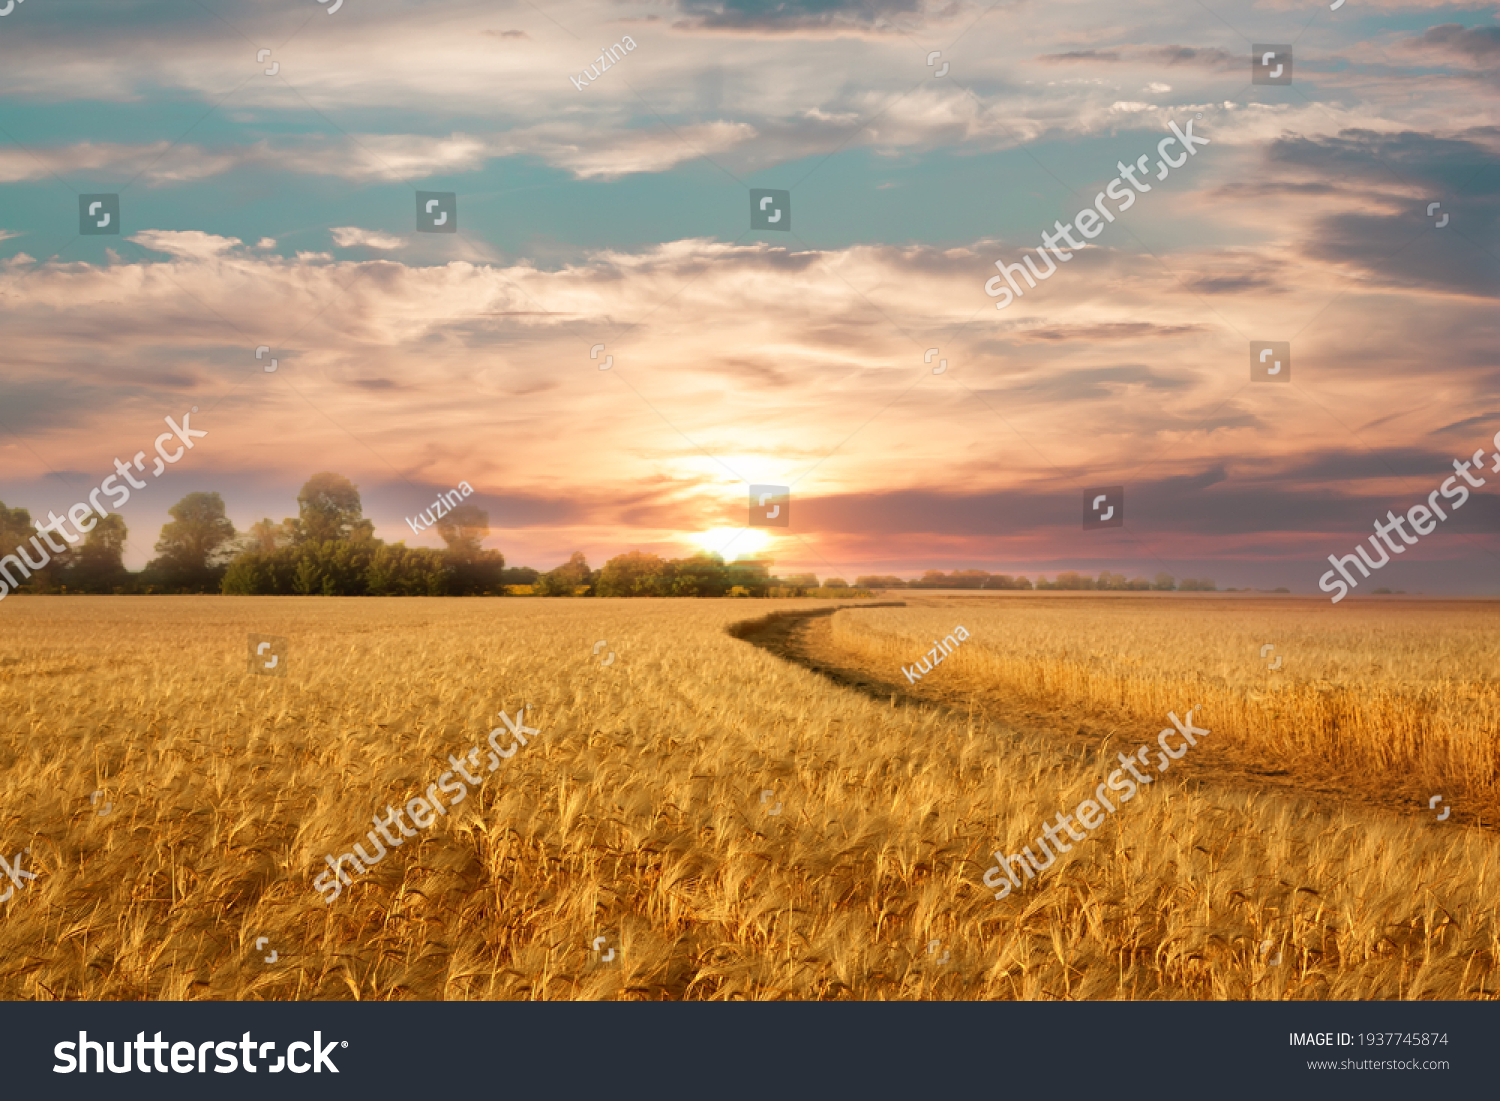 Golden wheat field on the background of hot summer sun and blue sky with white clouds.Ground road leaving to the horizon. Beautiful summer landscape. #1937745874